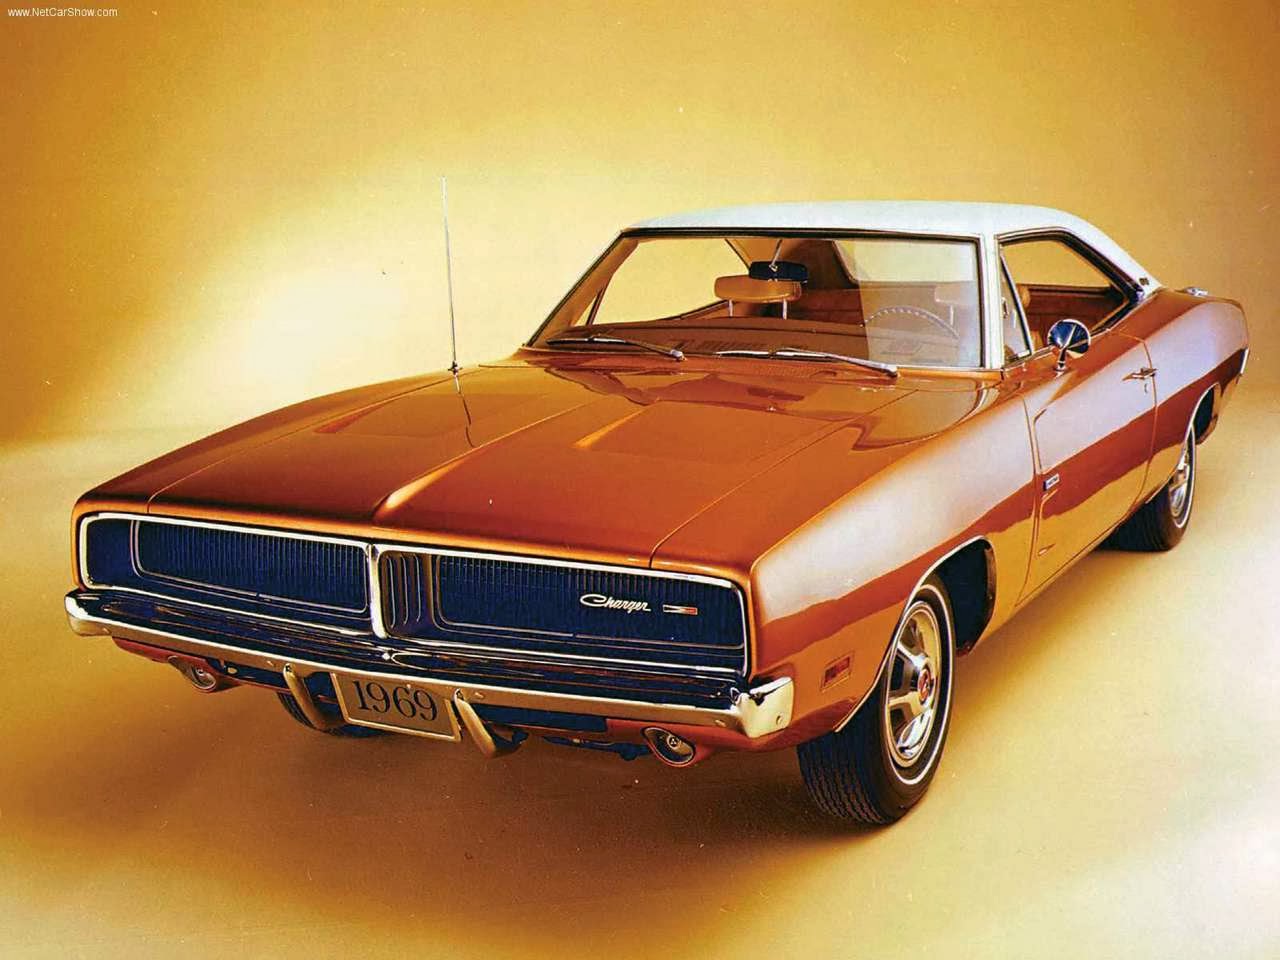 The Best Old Muscle cars 1969 Dodge Charger